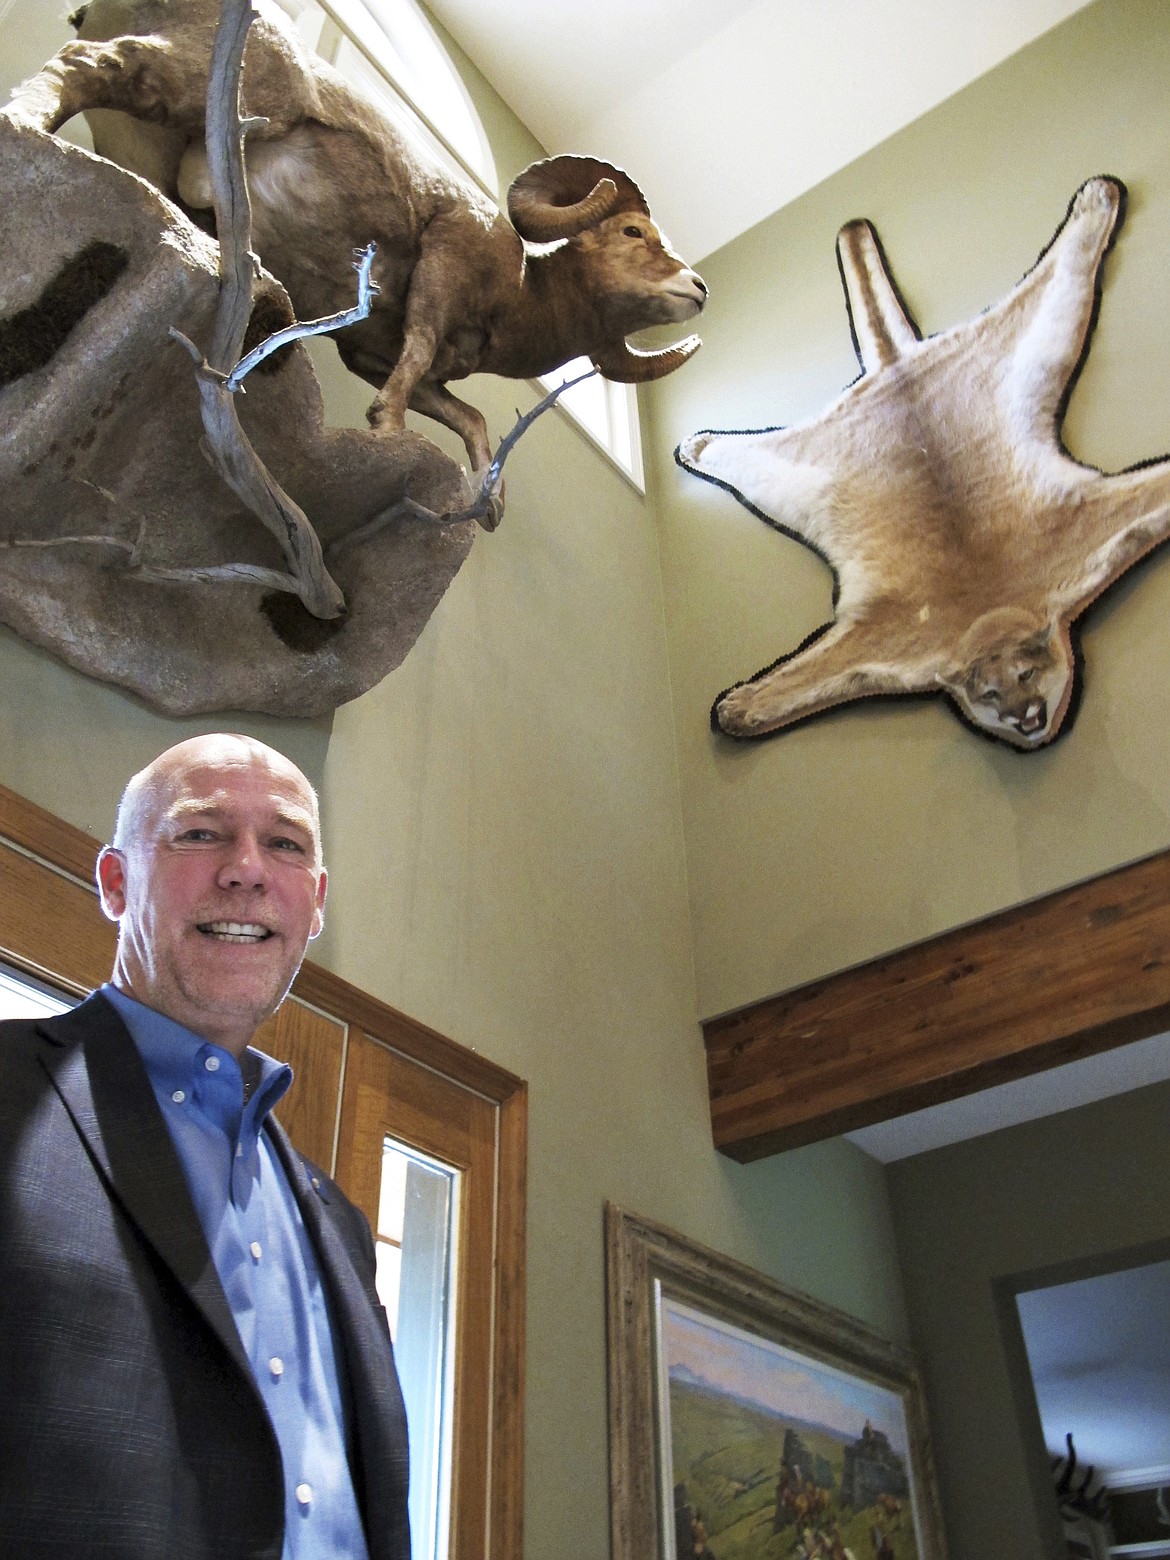 FILE - In this Oct. 5, 2016 file photo, gubernatorial candidate, Republican Greg Gianforte poses below animal trophies in his home in Bozeman, Mont. Donald Trump Jr. will be targeting more than Republican voters when the president's son campaigns for U.S. House candidate Greg Gianforte in Montana on Friday, April 21, 2017 and Saturday, leading to backlash from at least one animal-rights organization. Gianforte, who is up against Democrat Rob Quist in the May 25 election for the U.S. House seat vacated by Interior Secretary Ryan Zinke, is planning to take Trump on a prairie dog hunt during their four-city campaign tour. (AP Photo/Matt Volz, File)